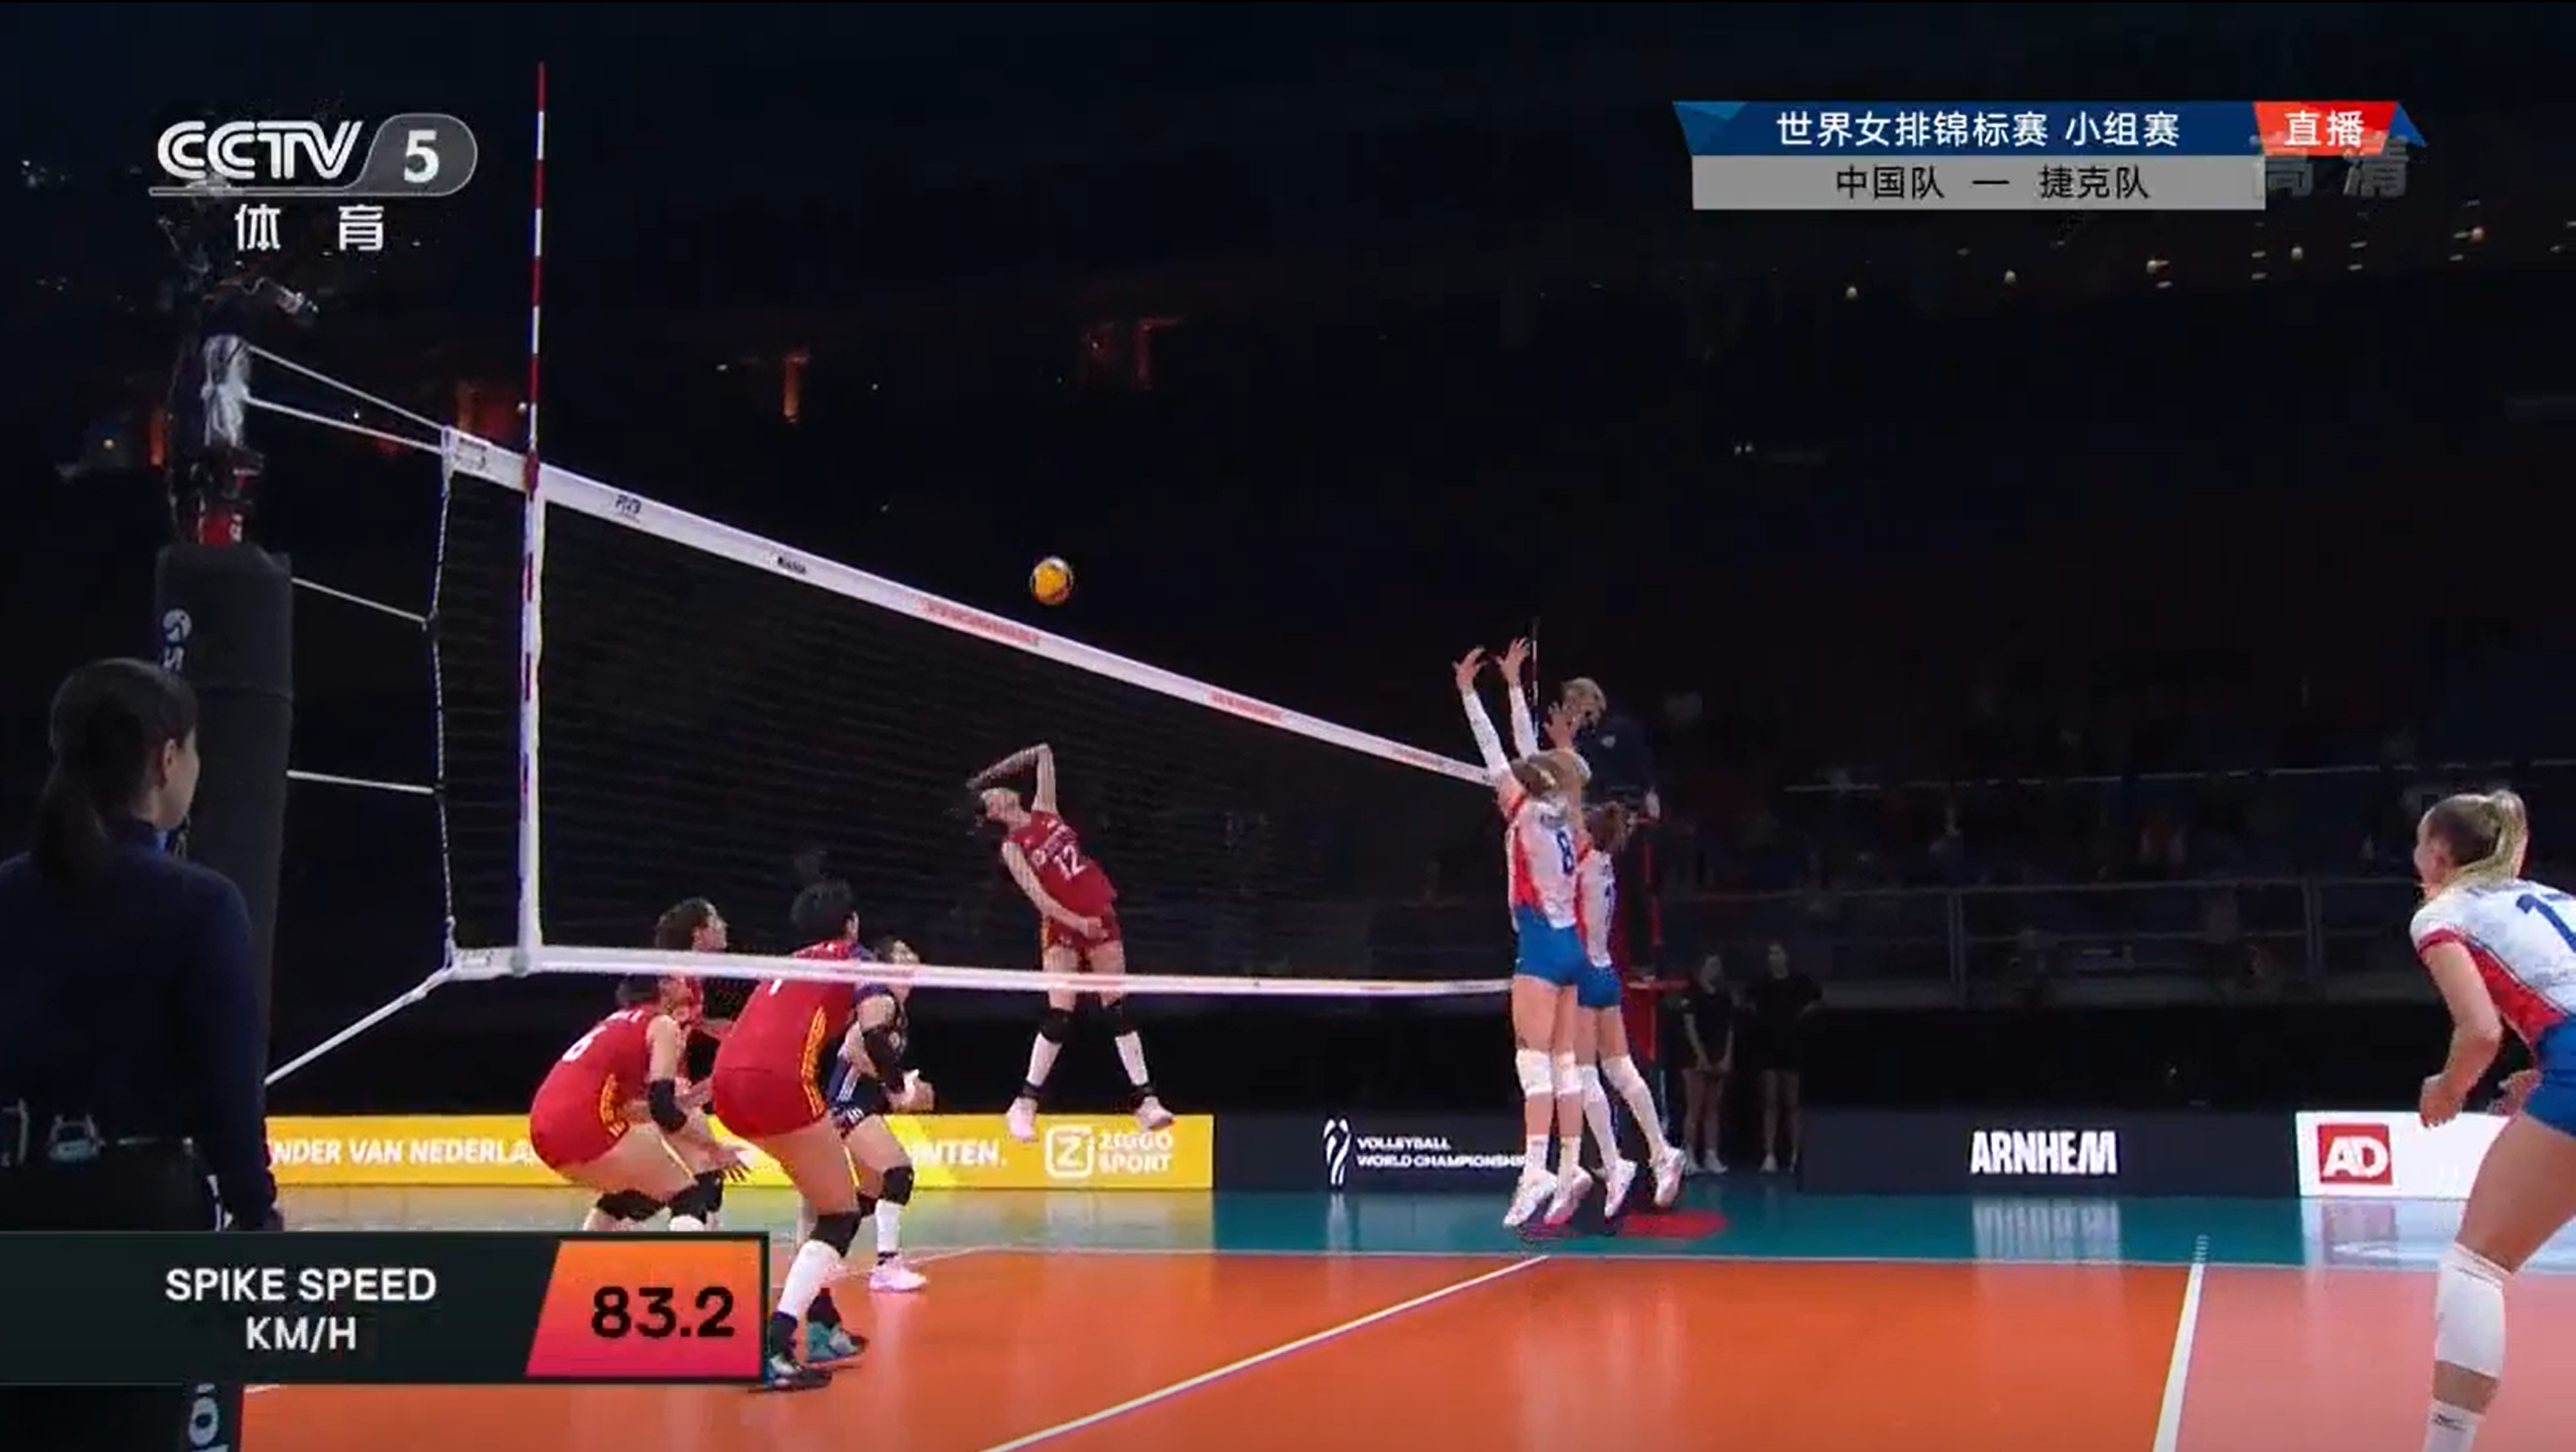 Li Yingying (#12) of China spikes in the FIVB Volleyball Women's World Championship match against the Czech Republic in Arnhem, the Netherlands, September 30, 2022. /CFP